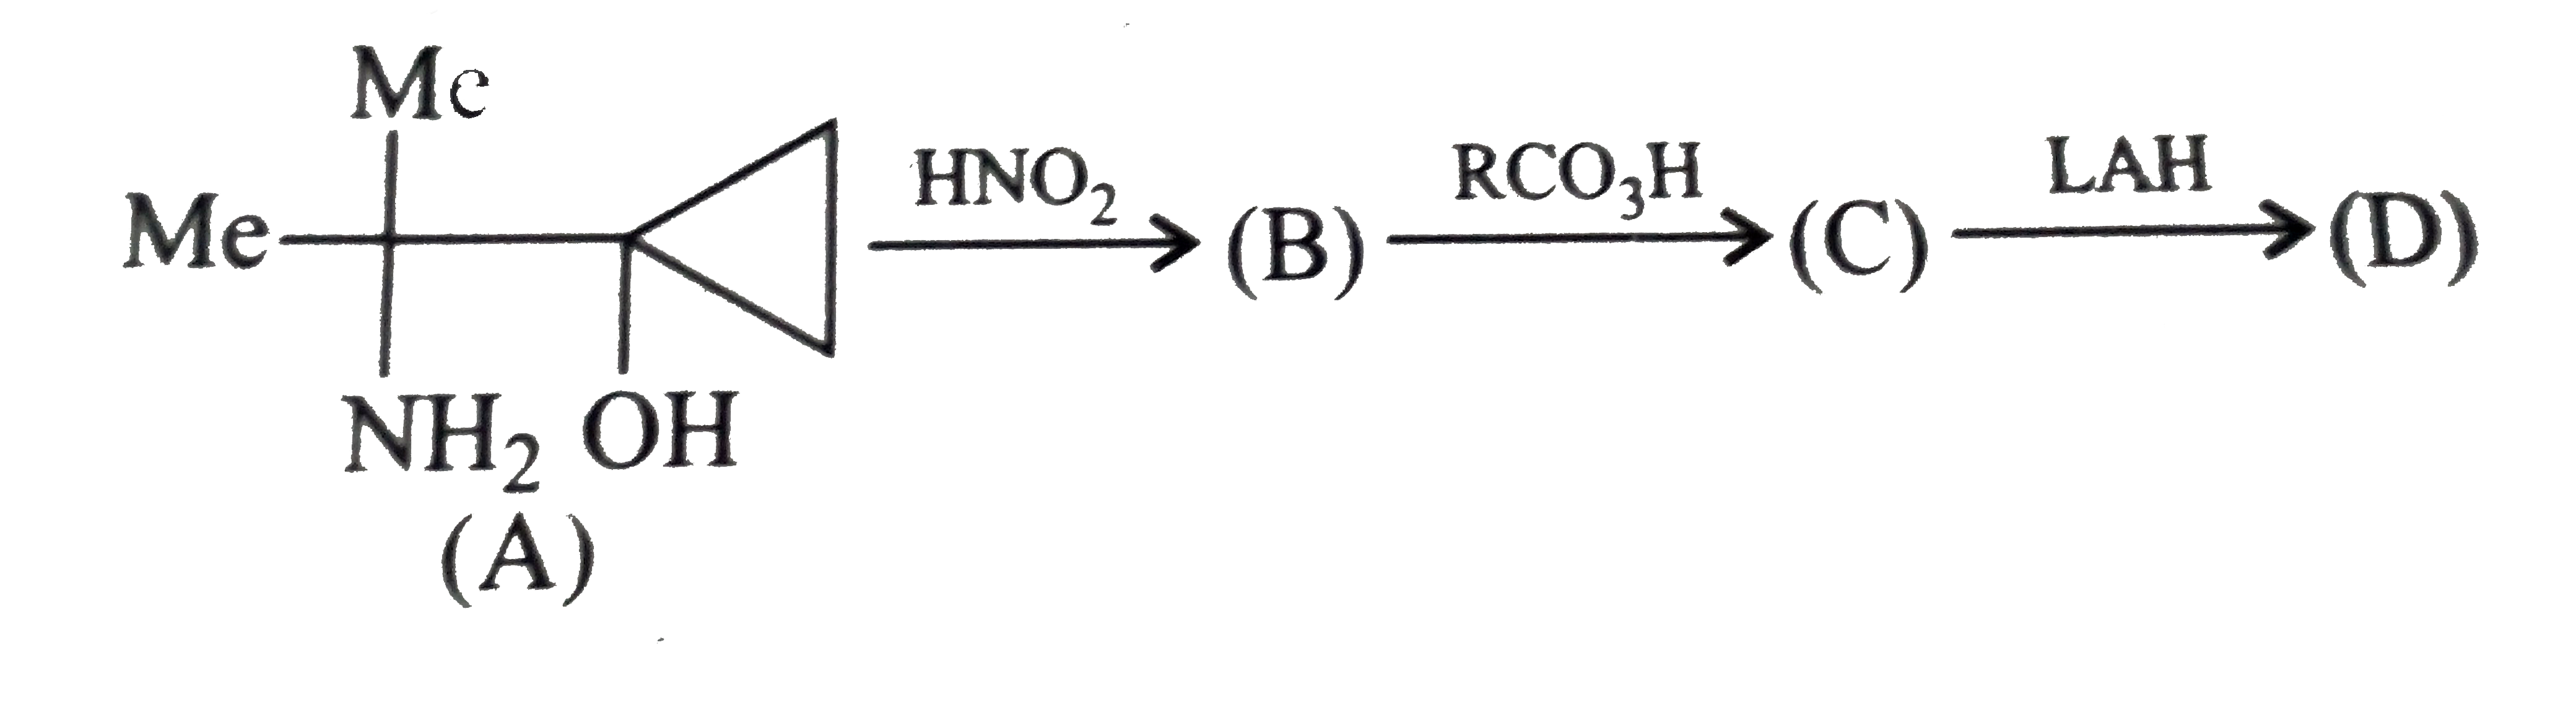 The reaction in the conversion of (B) to (C ) is called: